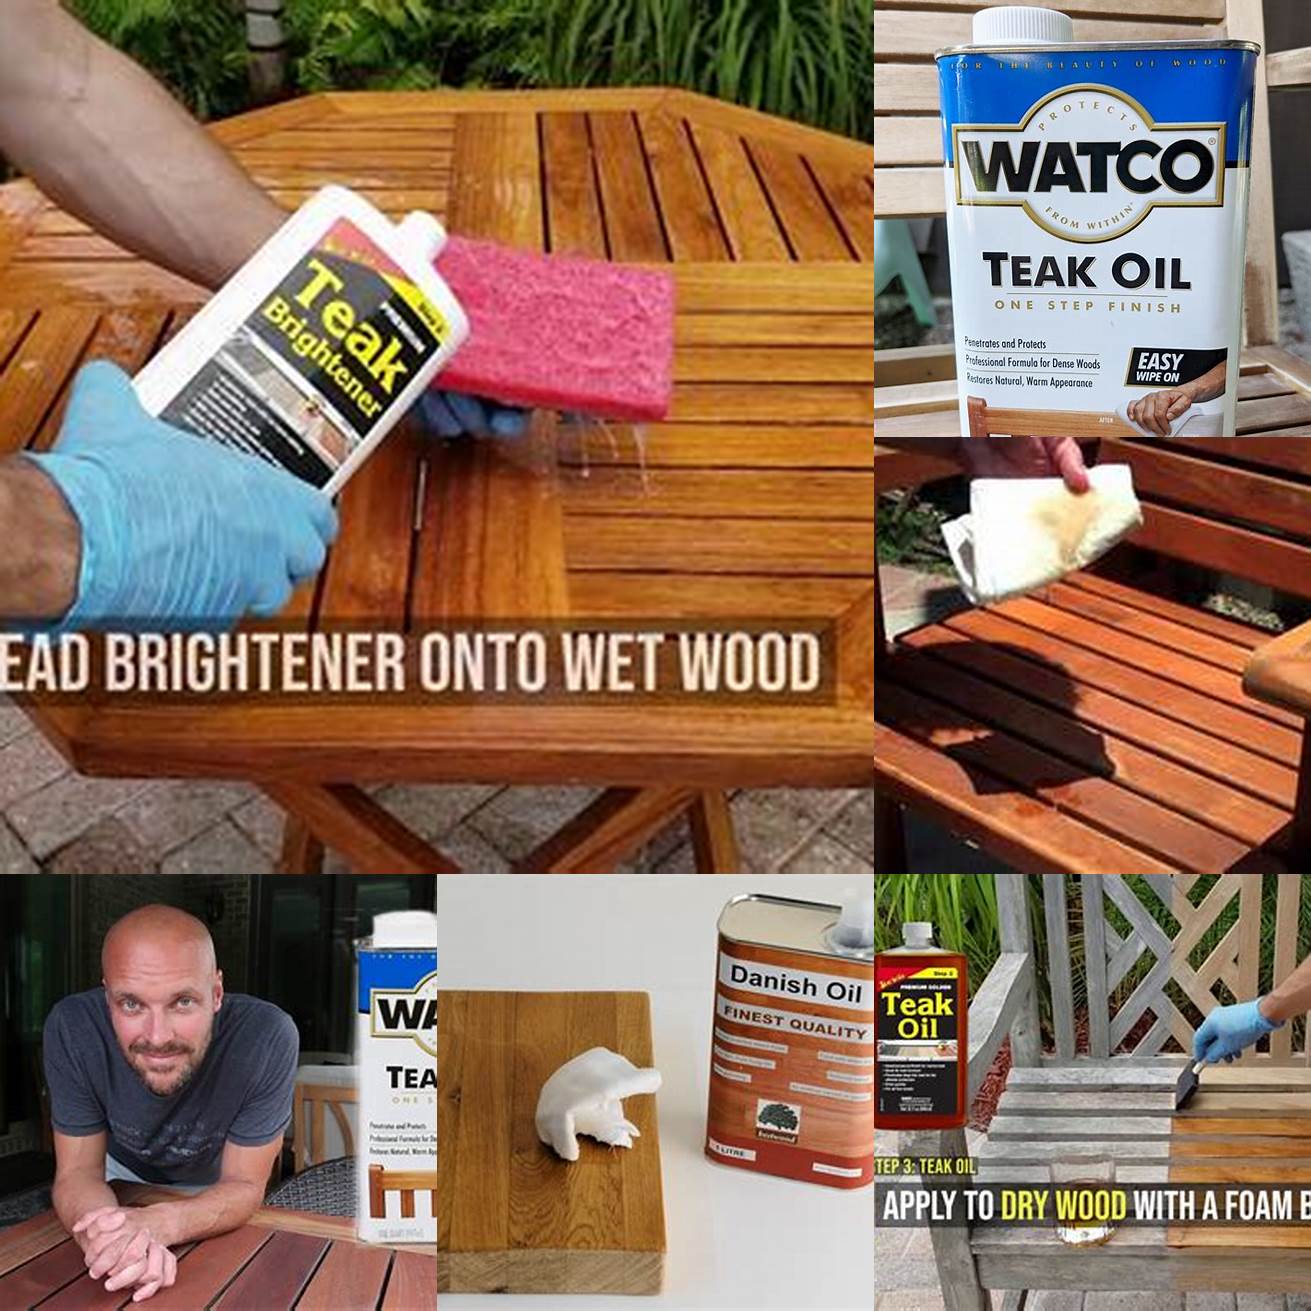 Cleaning and Maintaining Watco Teak Oil